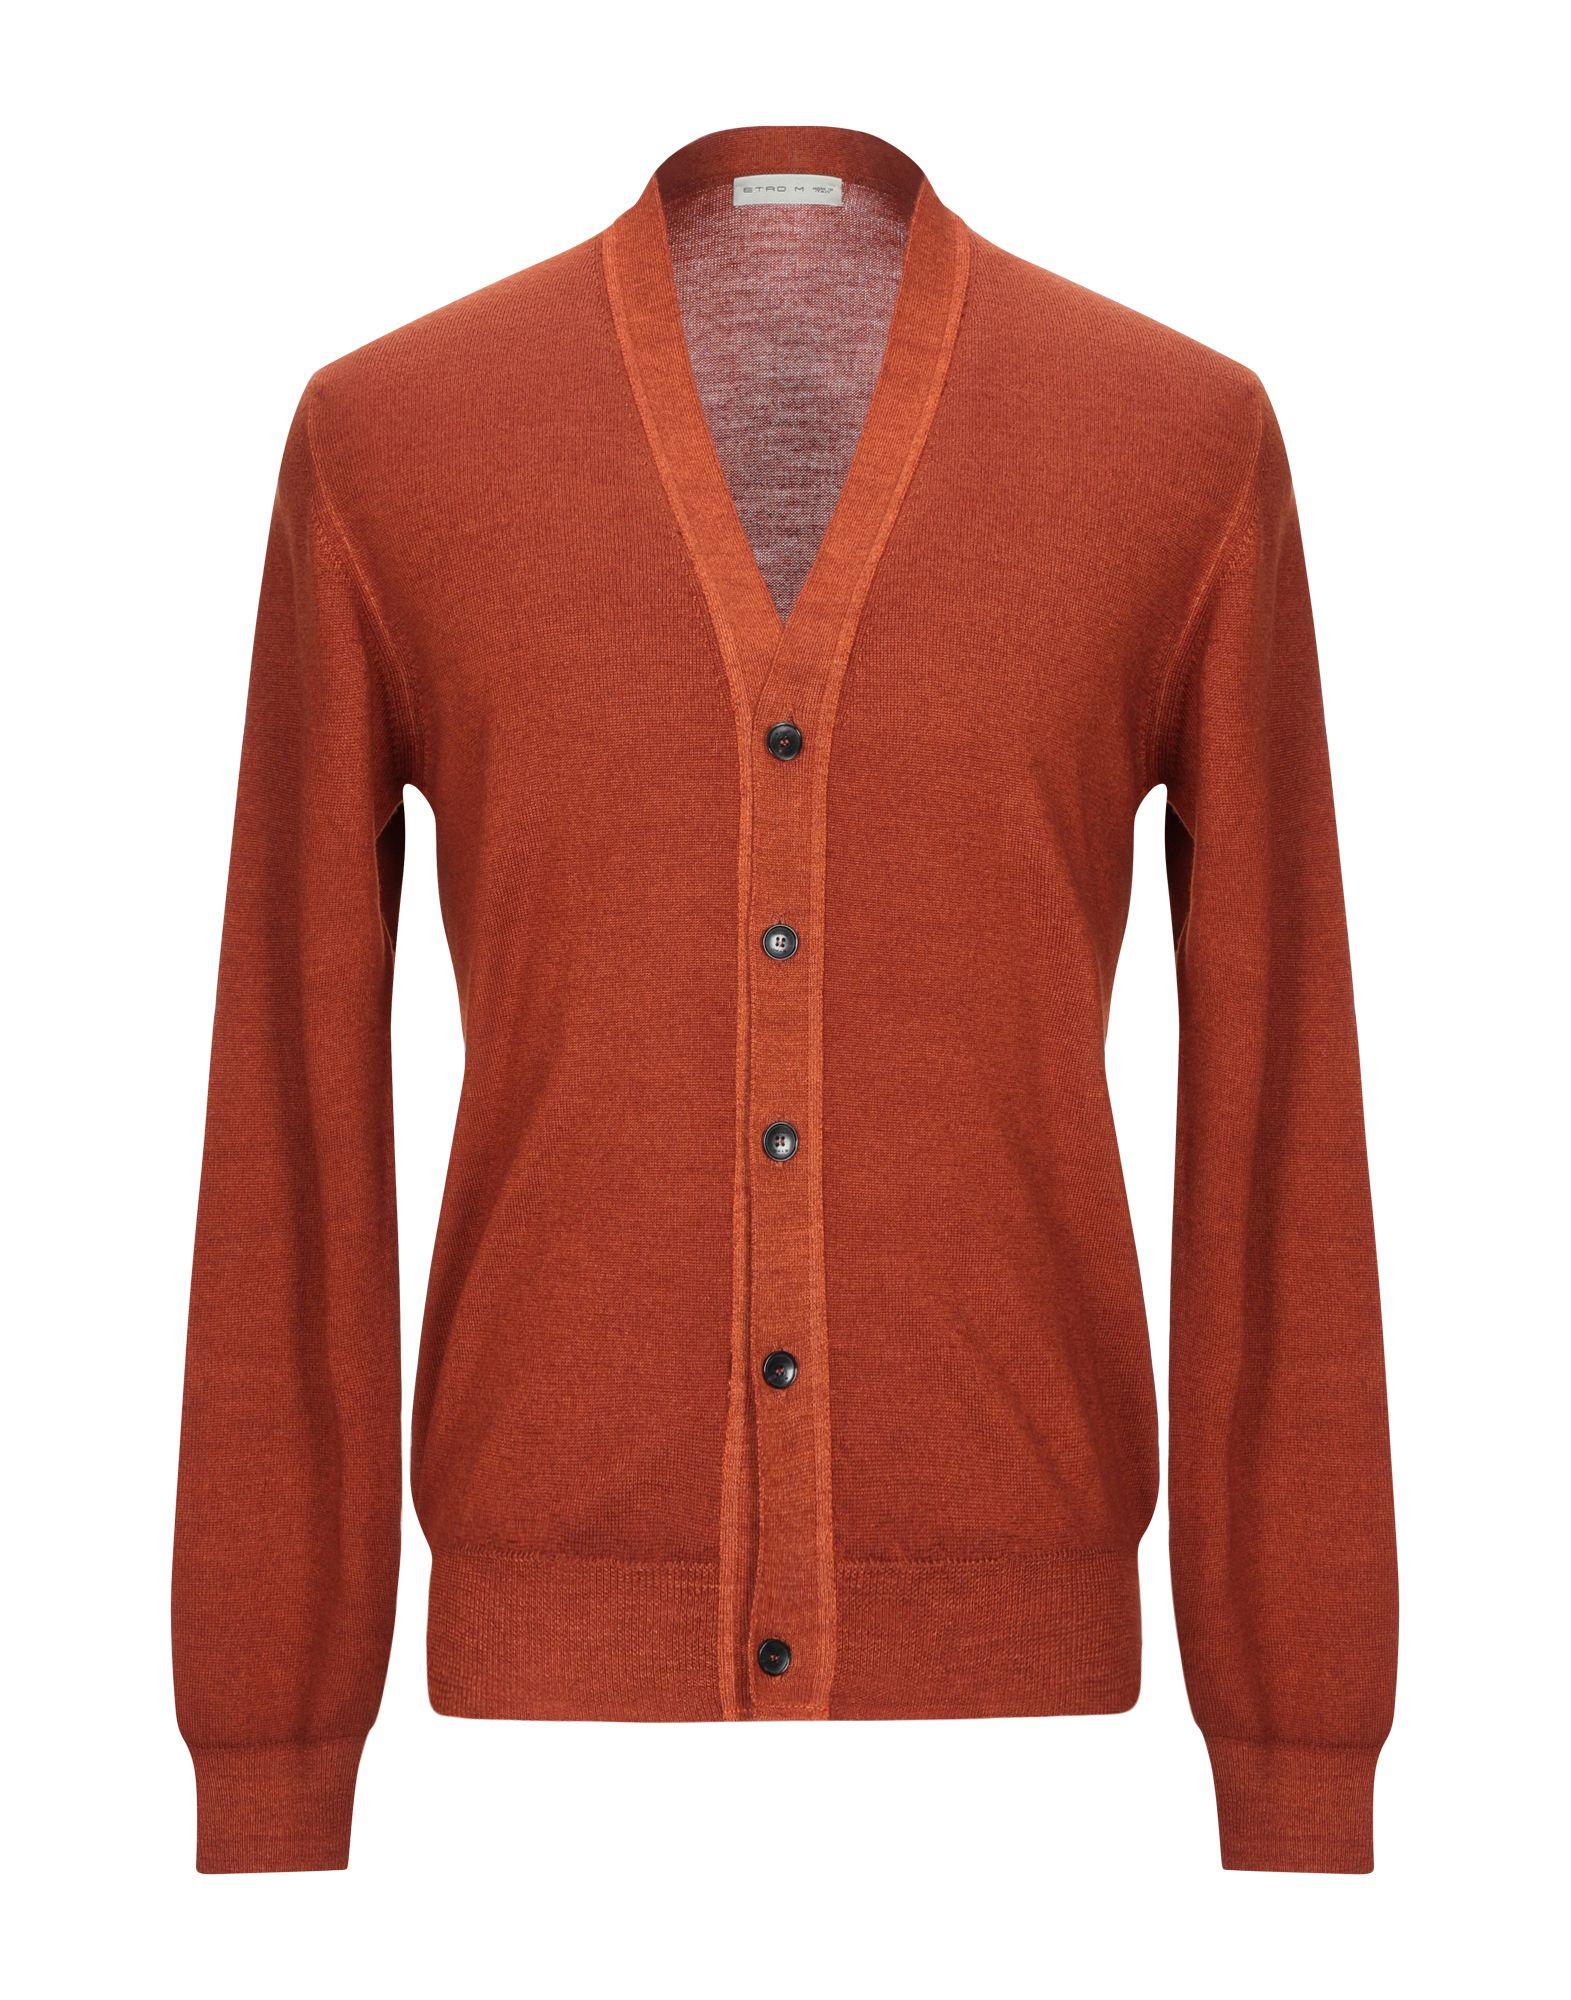 Etro Wool Cardigan  in Rust Red  for Men  Lyst